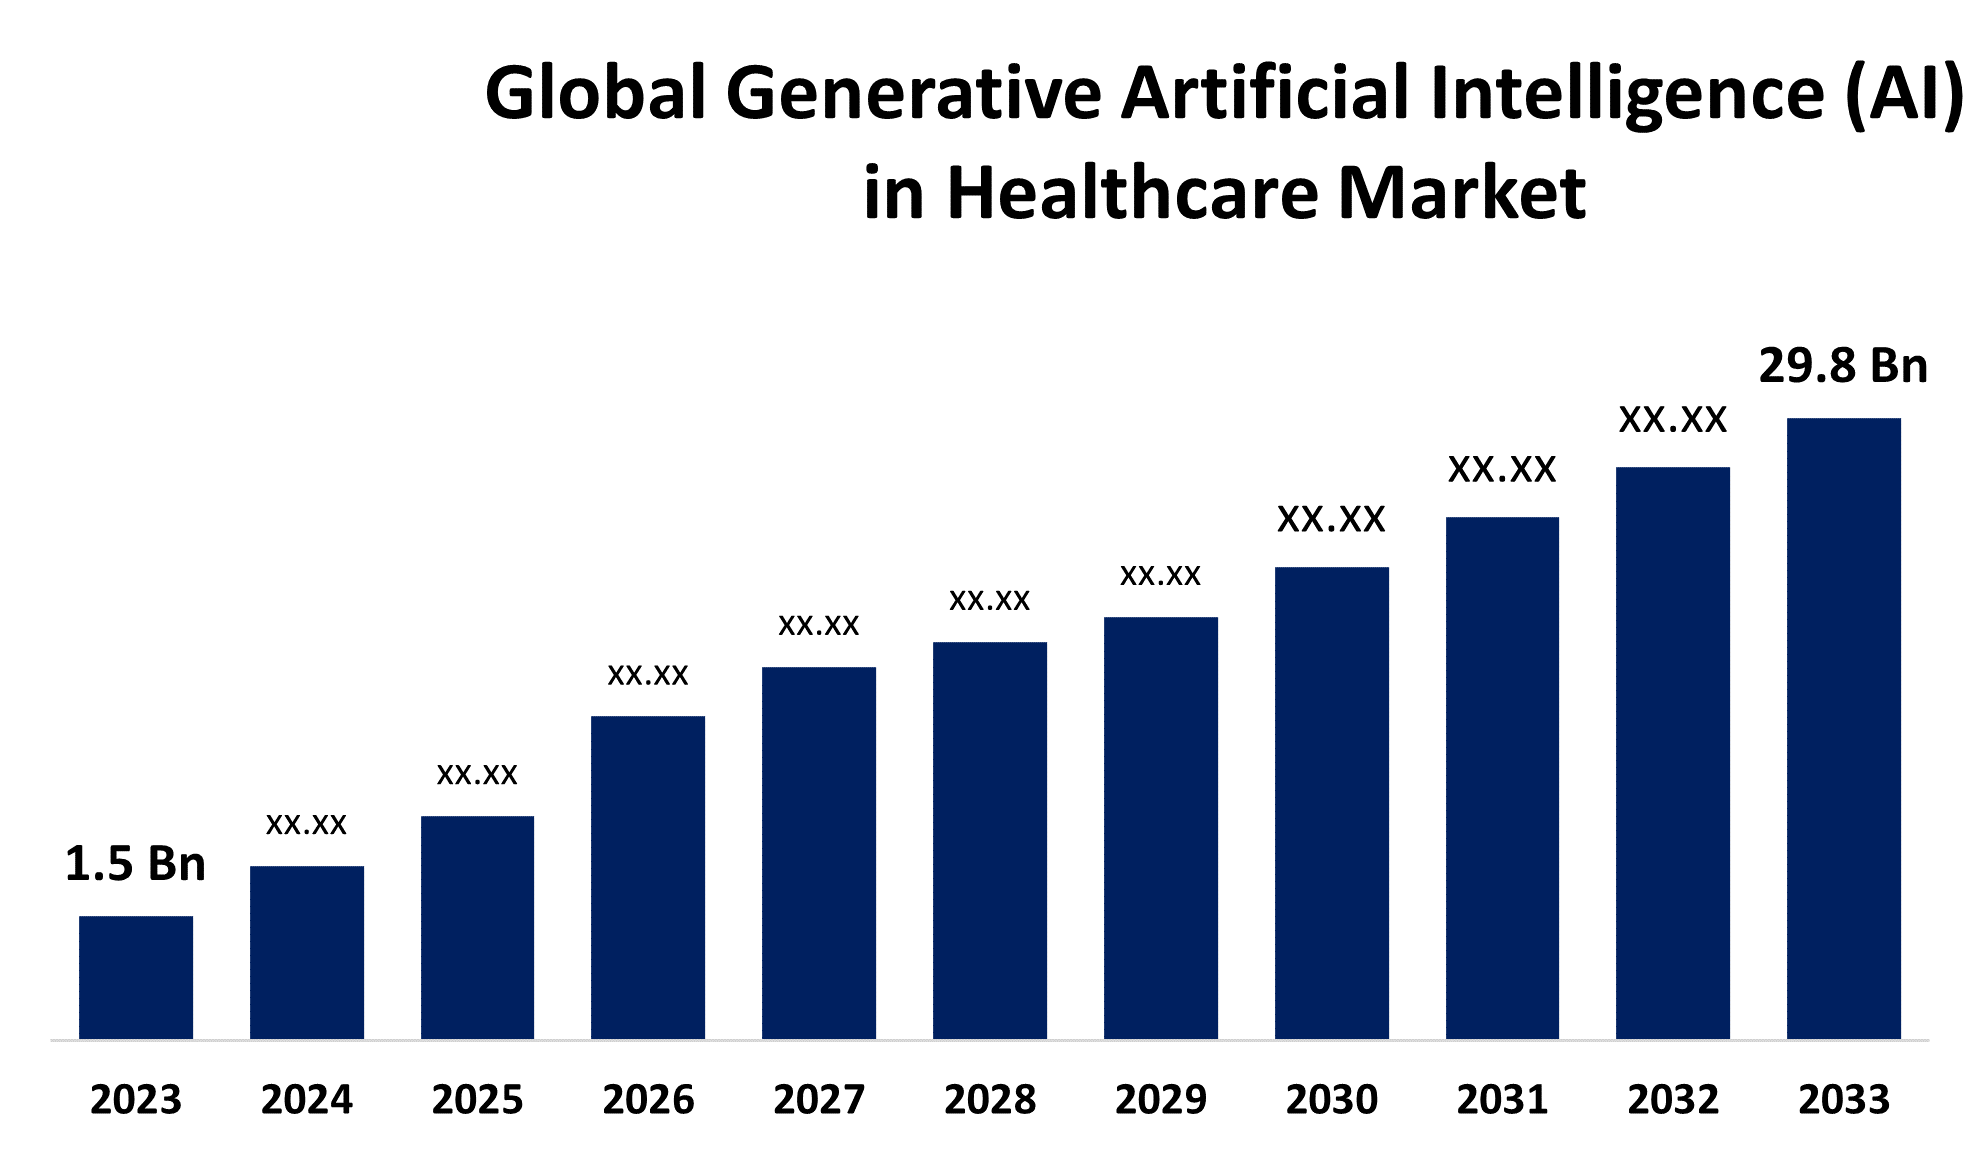 Global Generative Artificial Intelligence (AI) in Healthcare Market